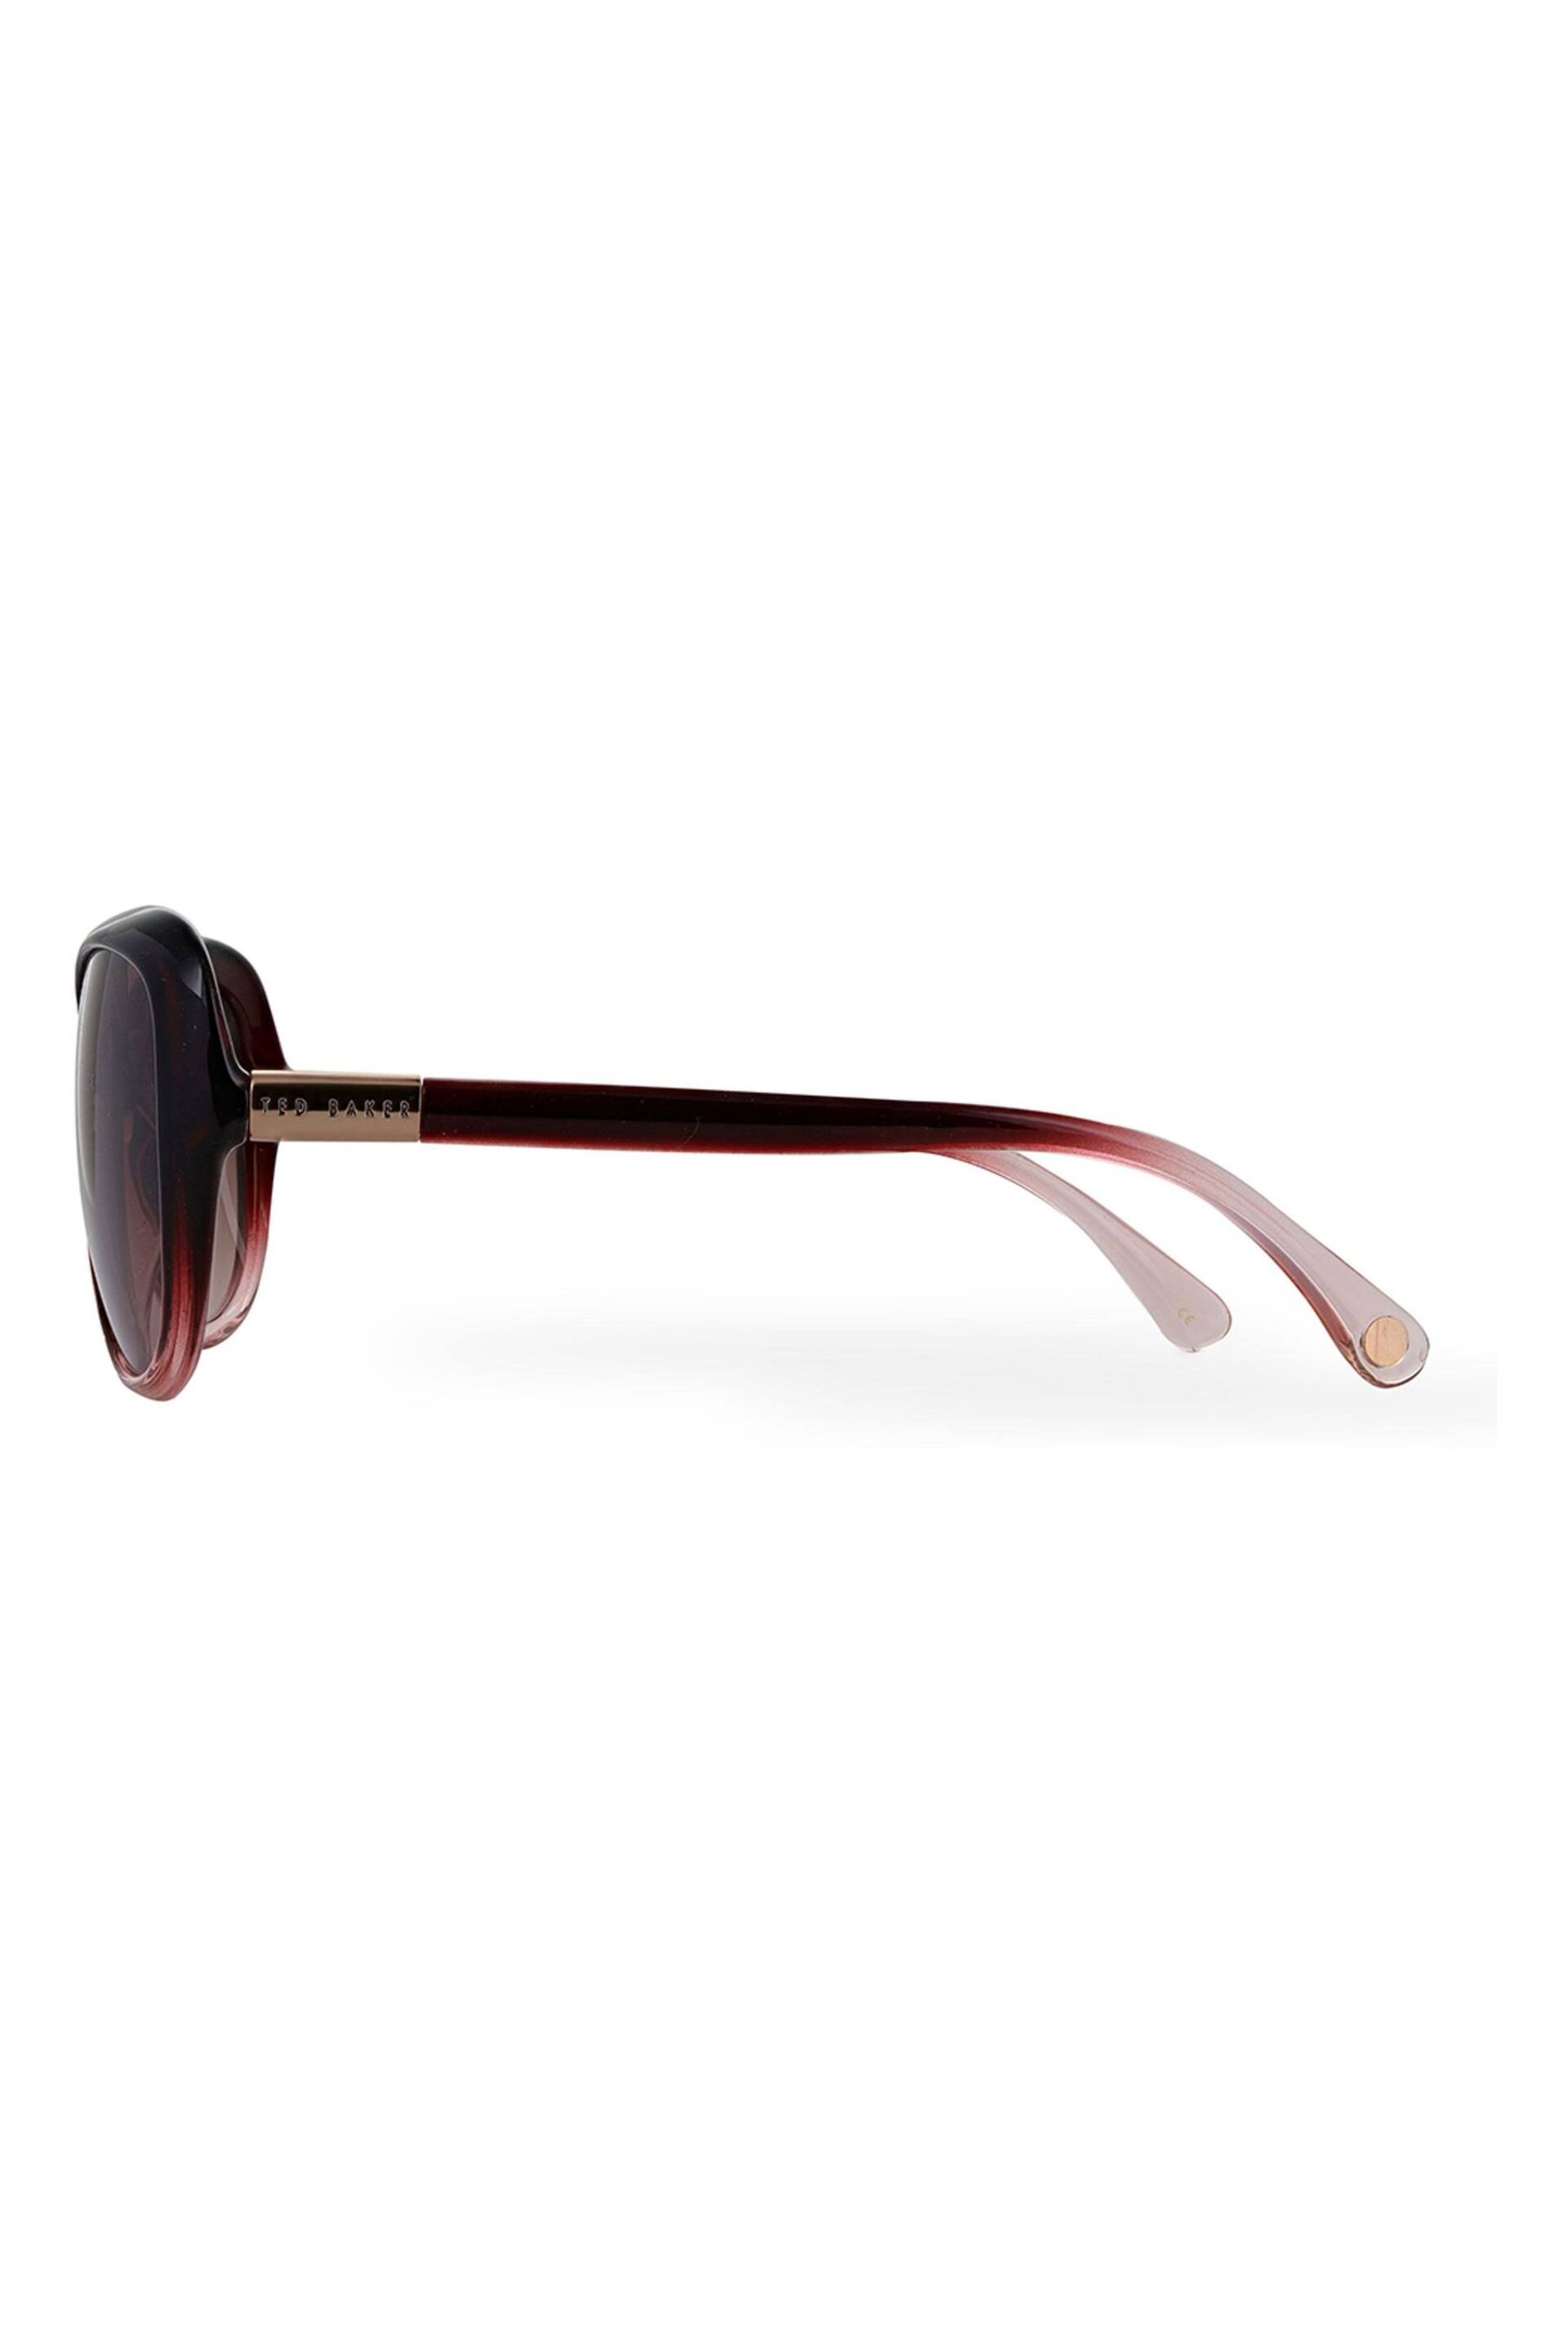 Ted Baker Gradient Wine Red Oversized Graduated Fashion Frame Sunglasses - Image 3 of 5